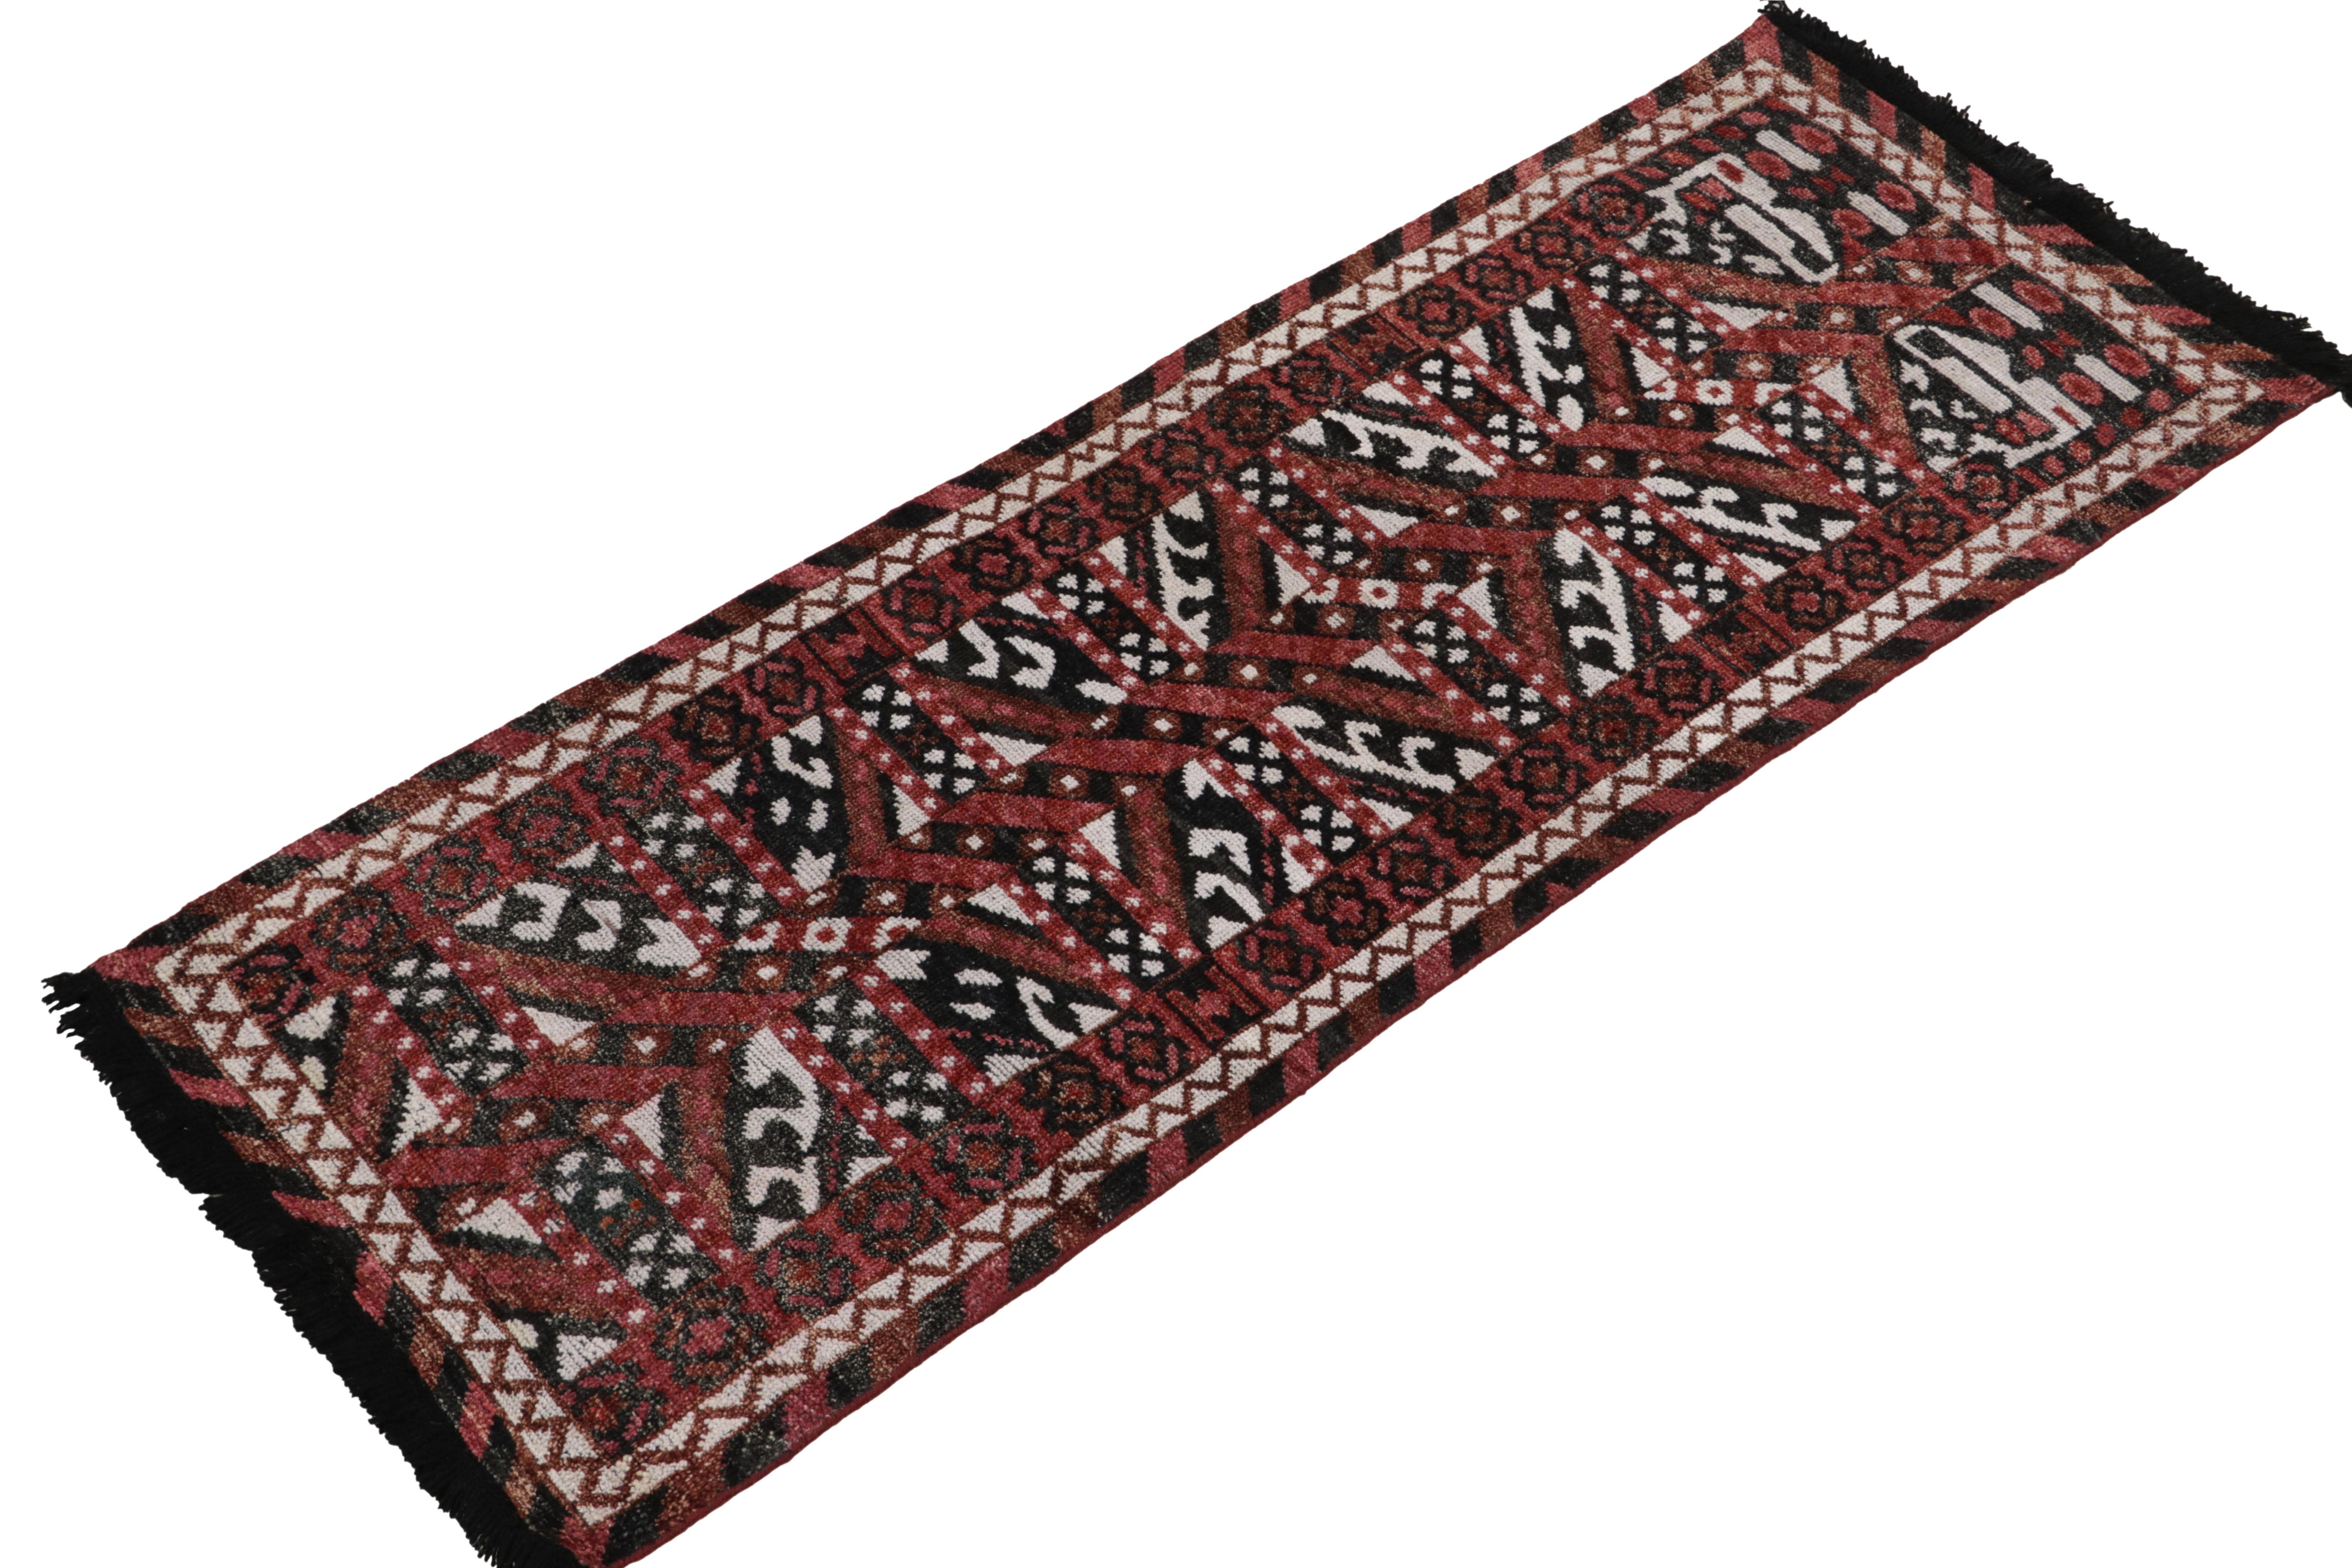 Indian Rug & Kilim's Tribal Style Runner in Red, Black and White Geometric Pattern For Sale